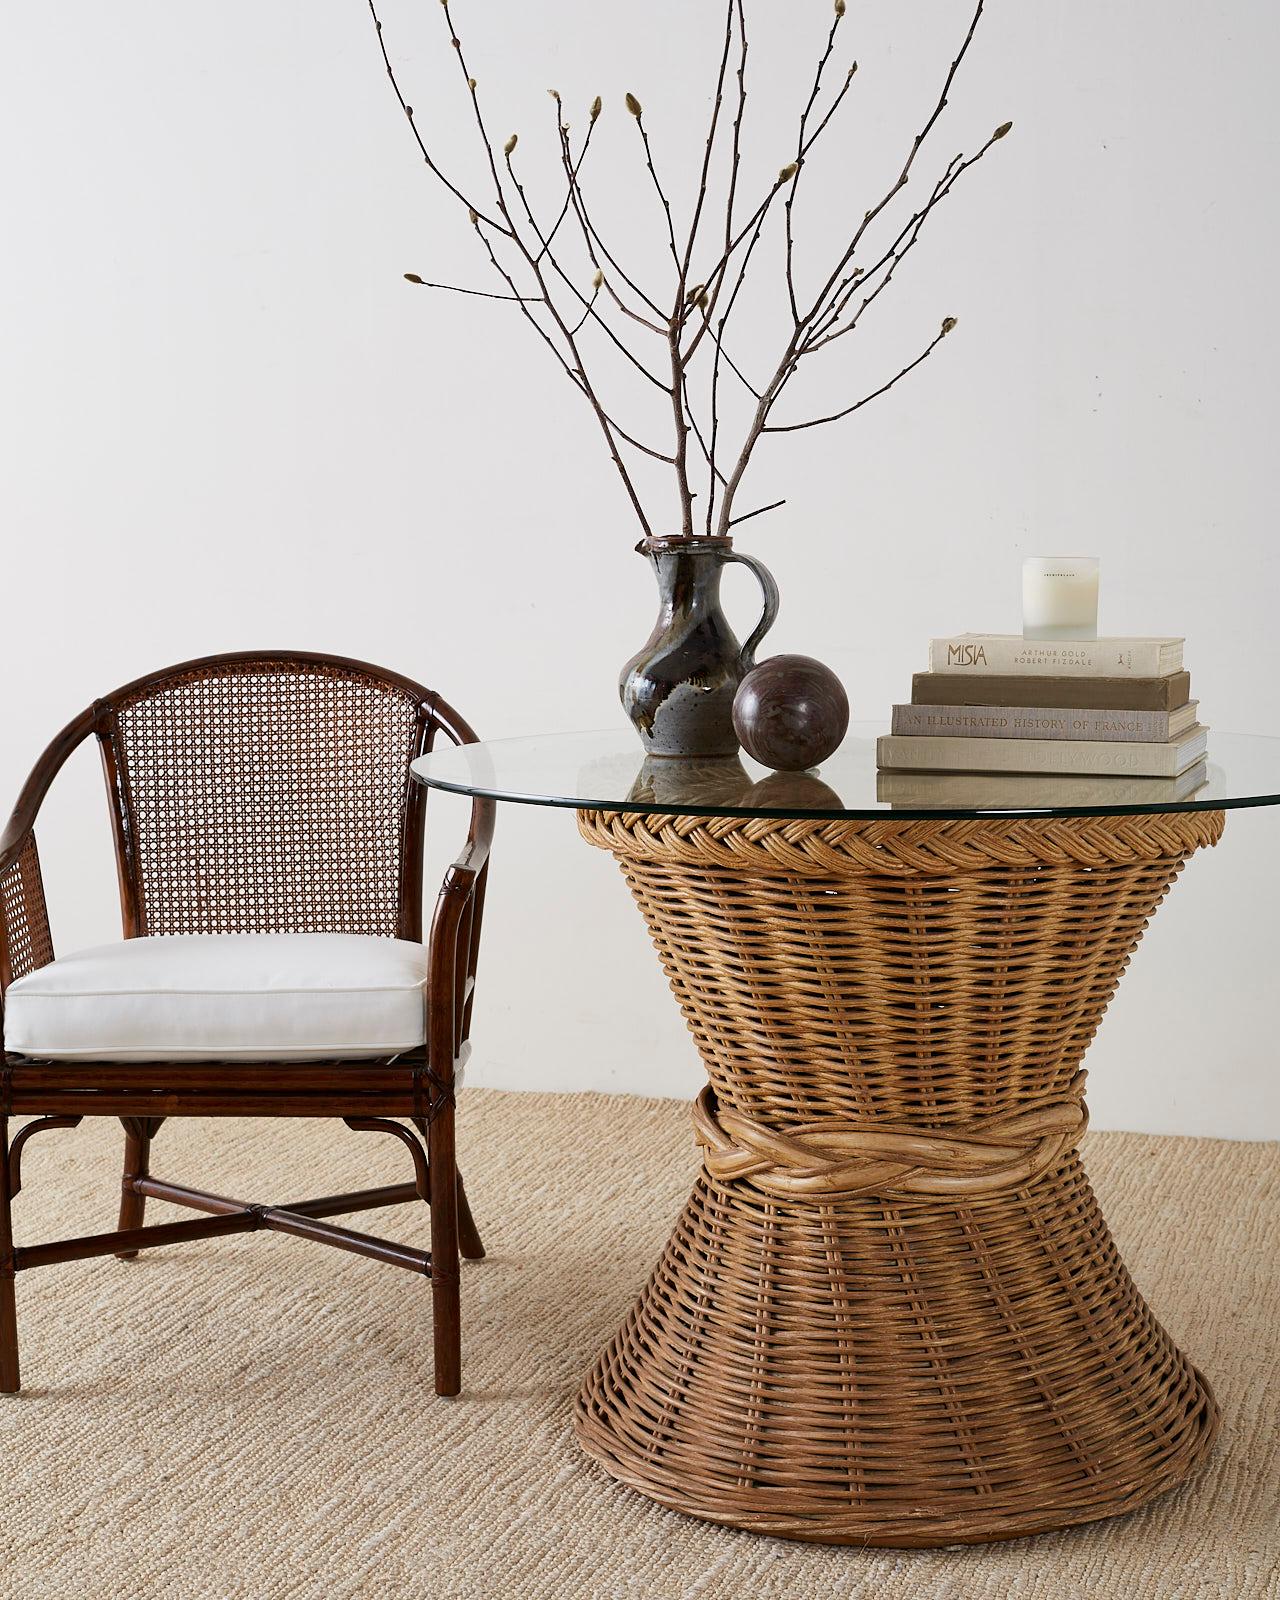 Handsome set of four rattan and cane horseshoe lounge chairs or club chairs. Classic mid-century style made by McGuire featuring a barrel-back form with cane inserts. The bamboo rattan frames have leather rawhide laces on the exposed joints and